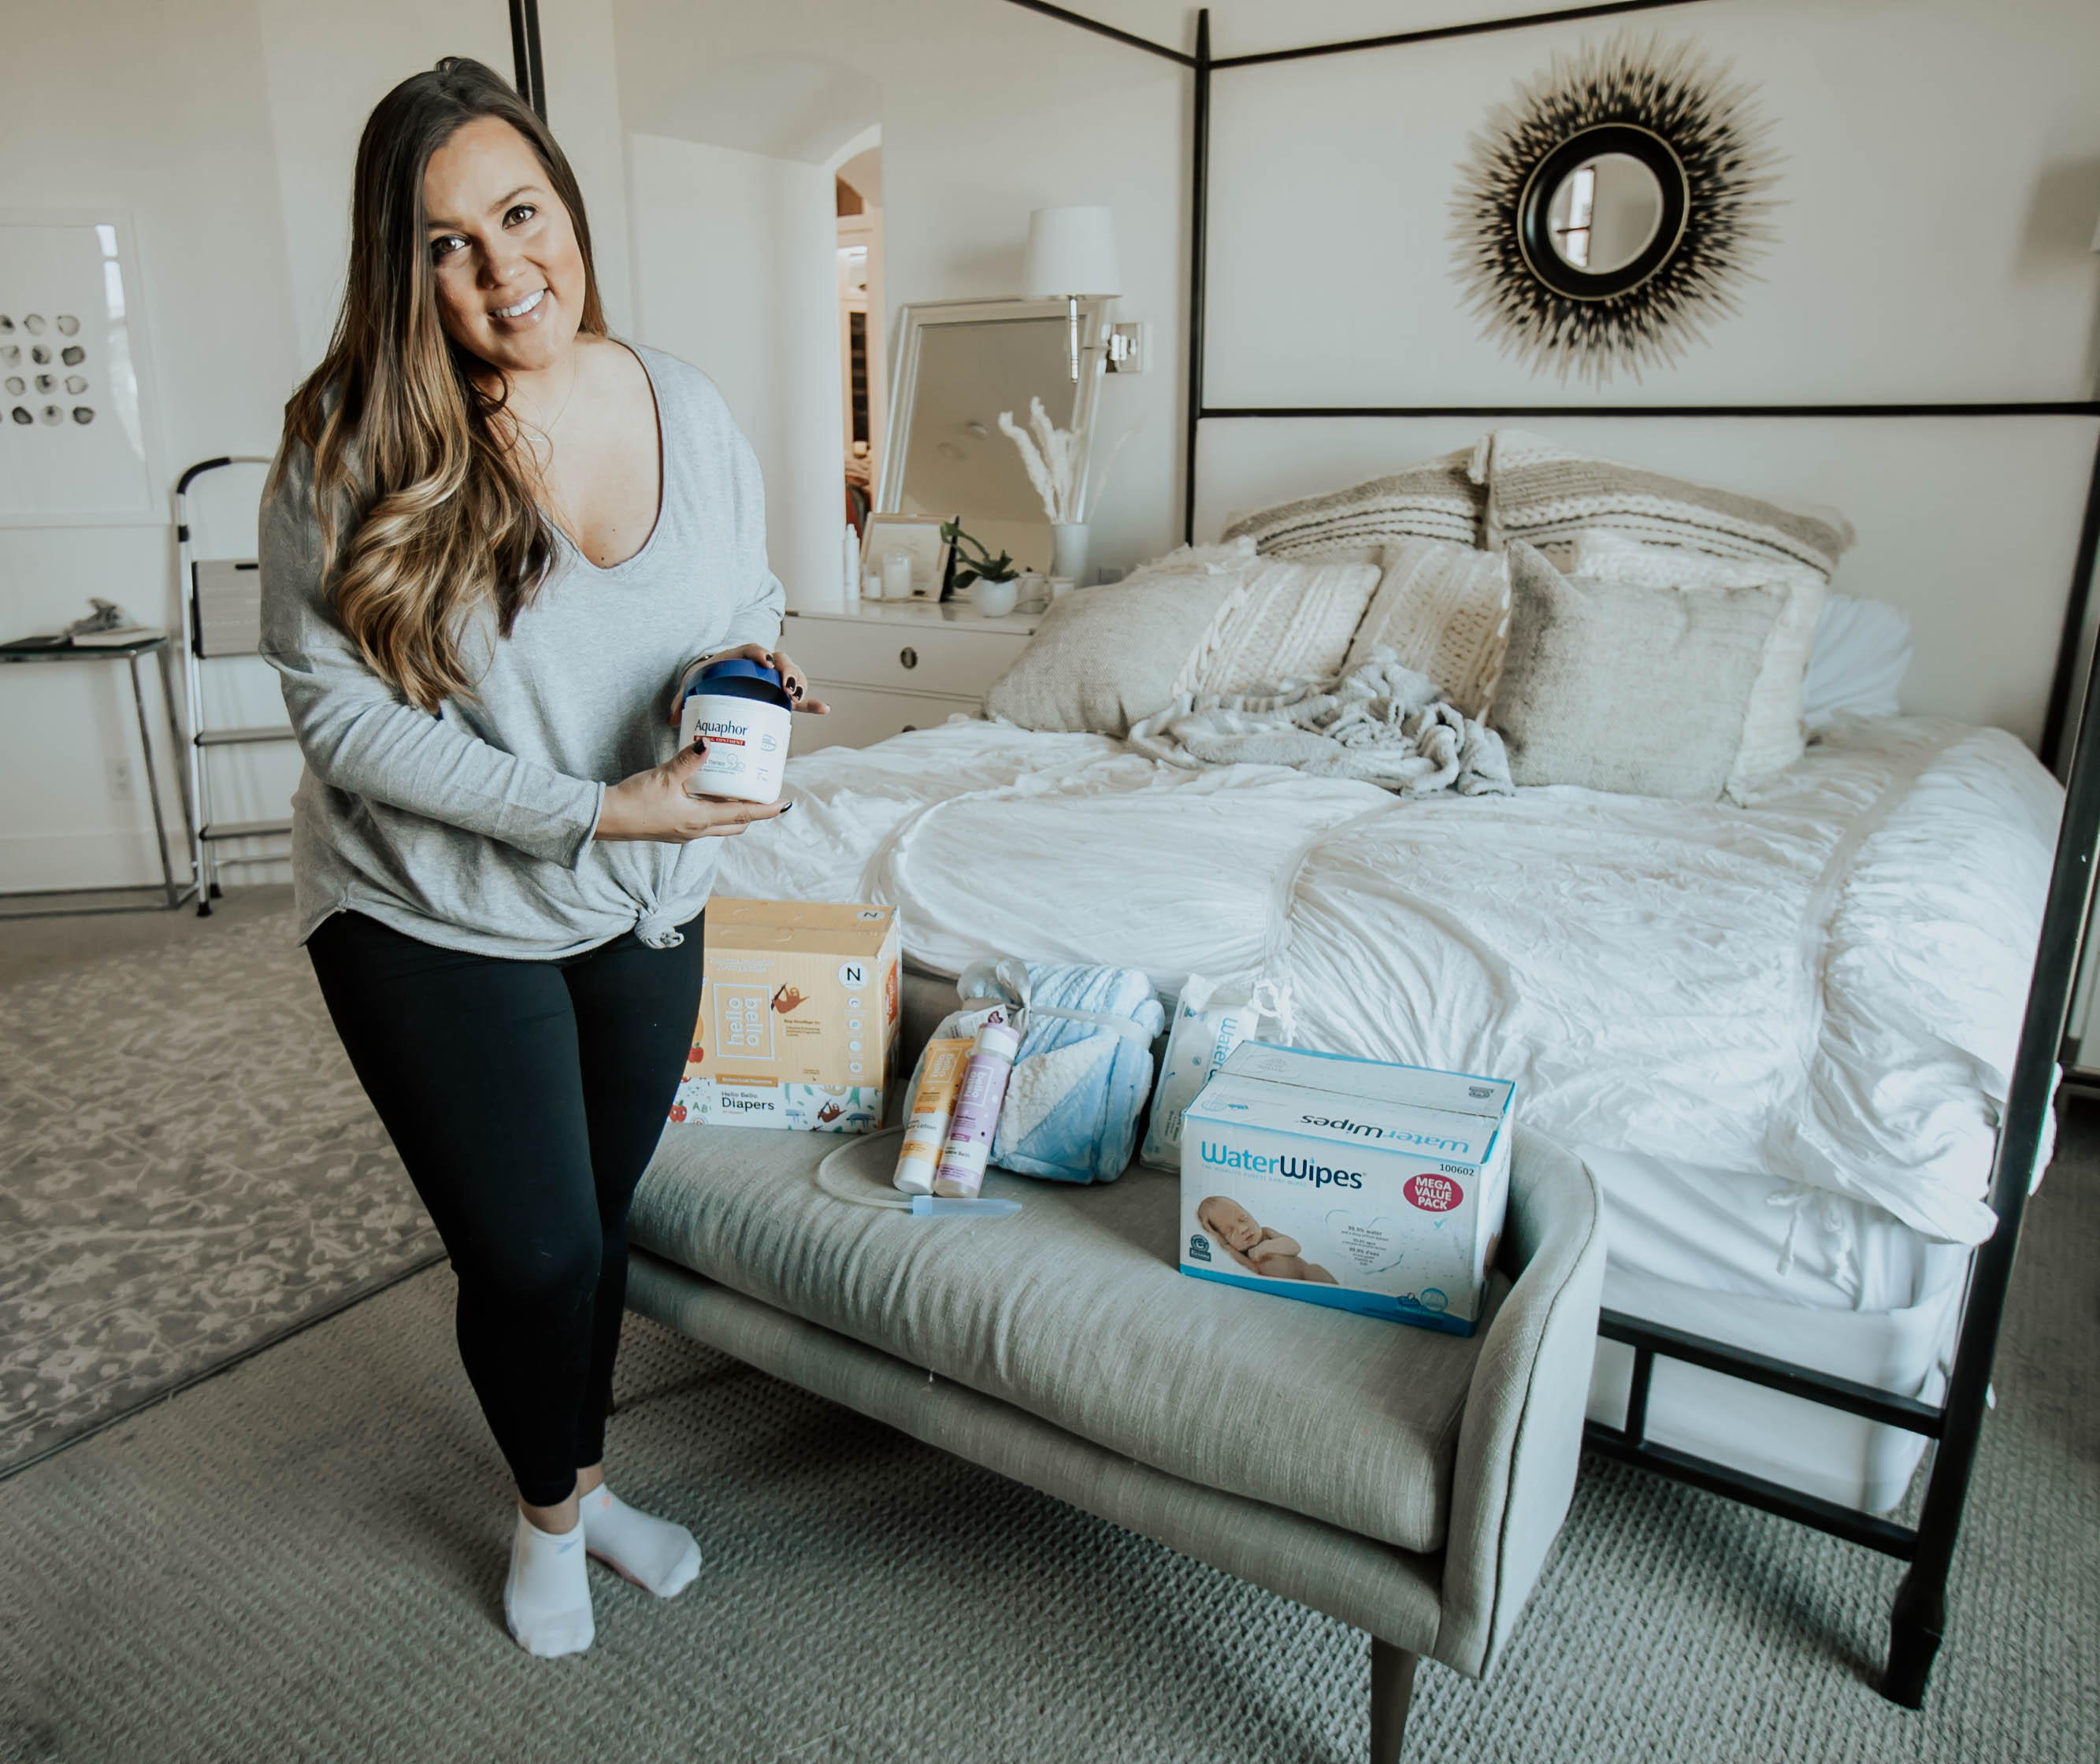 Reno fashion blogger Ashley Zeal from Two Peas in Prada shares all the products you need for the first week home with a baby. She is breaking down all the essentials from diapers to onesies. 